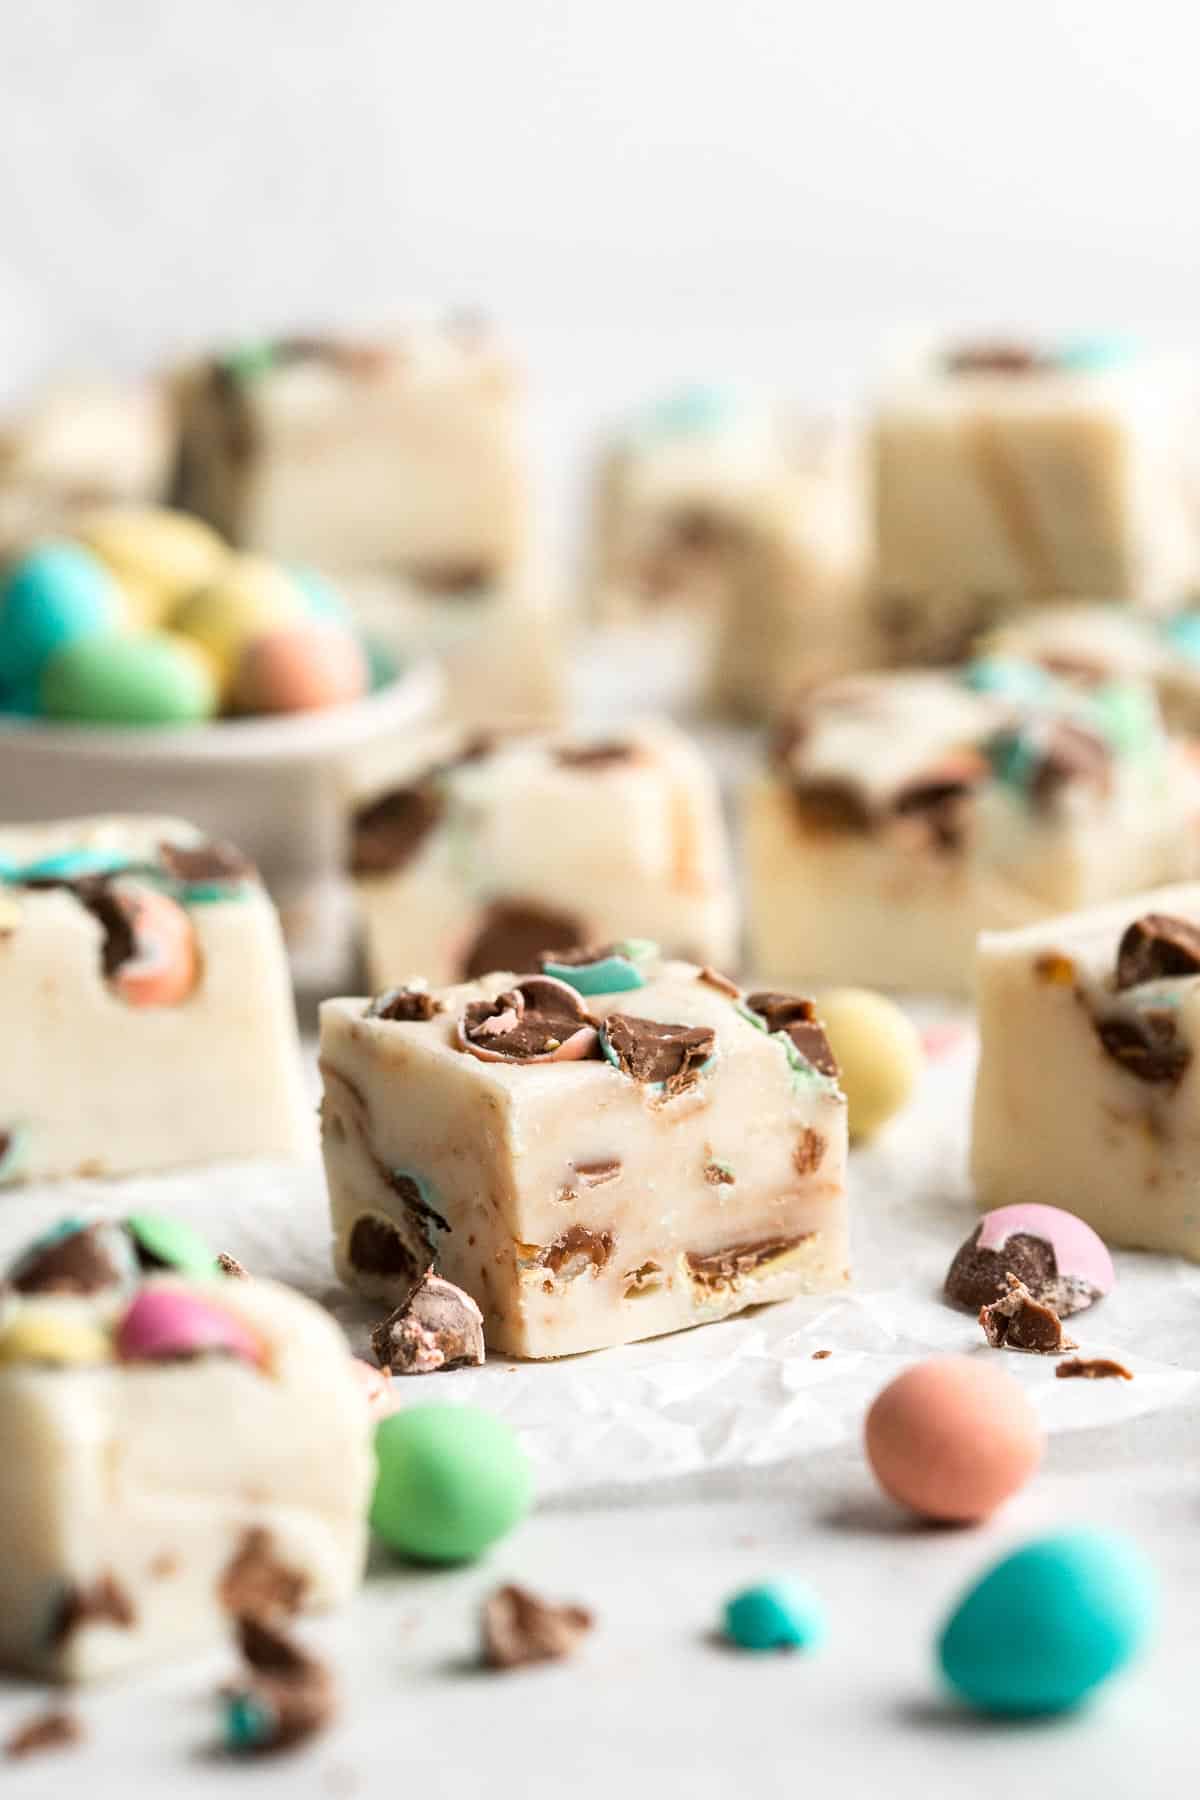 Mini Egg Easter Fudge is a rich, sweet, and colorful white chocolate fudge that is easy to make from scratch with just 3 simple ingredients. | aheadofthyme.com